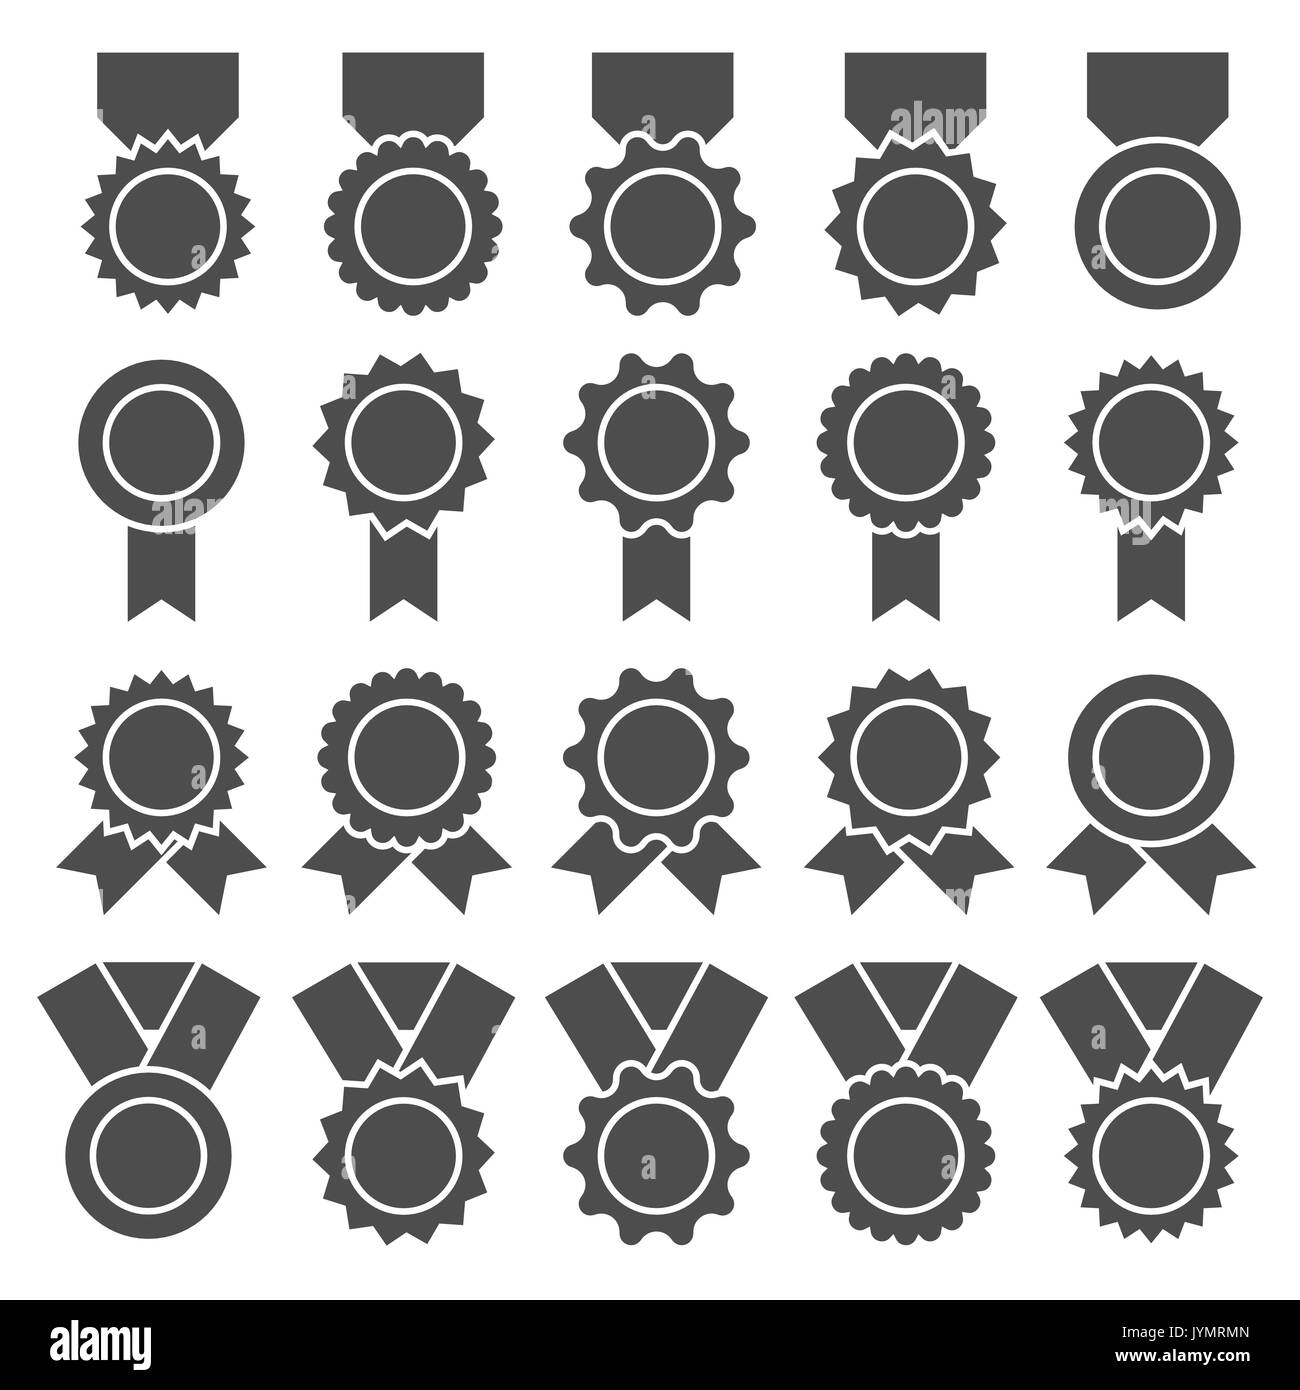 Set of medals, badges or awards with ribbons. Flat vector icon set Stock Vector